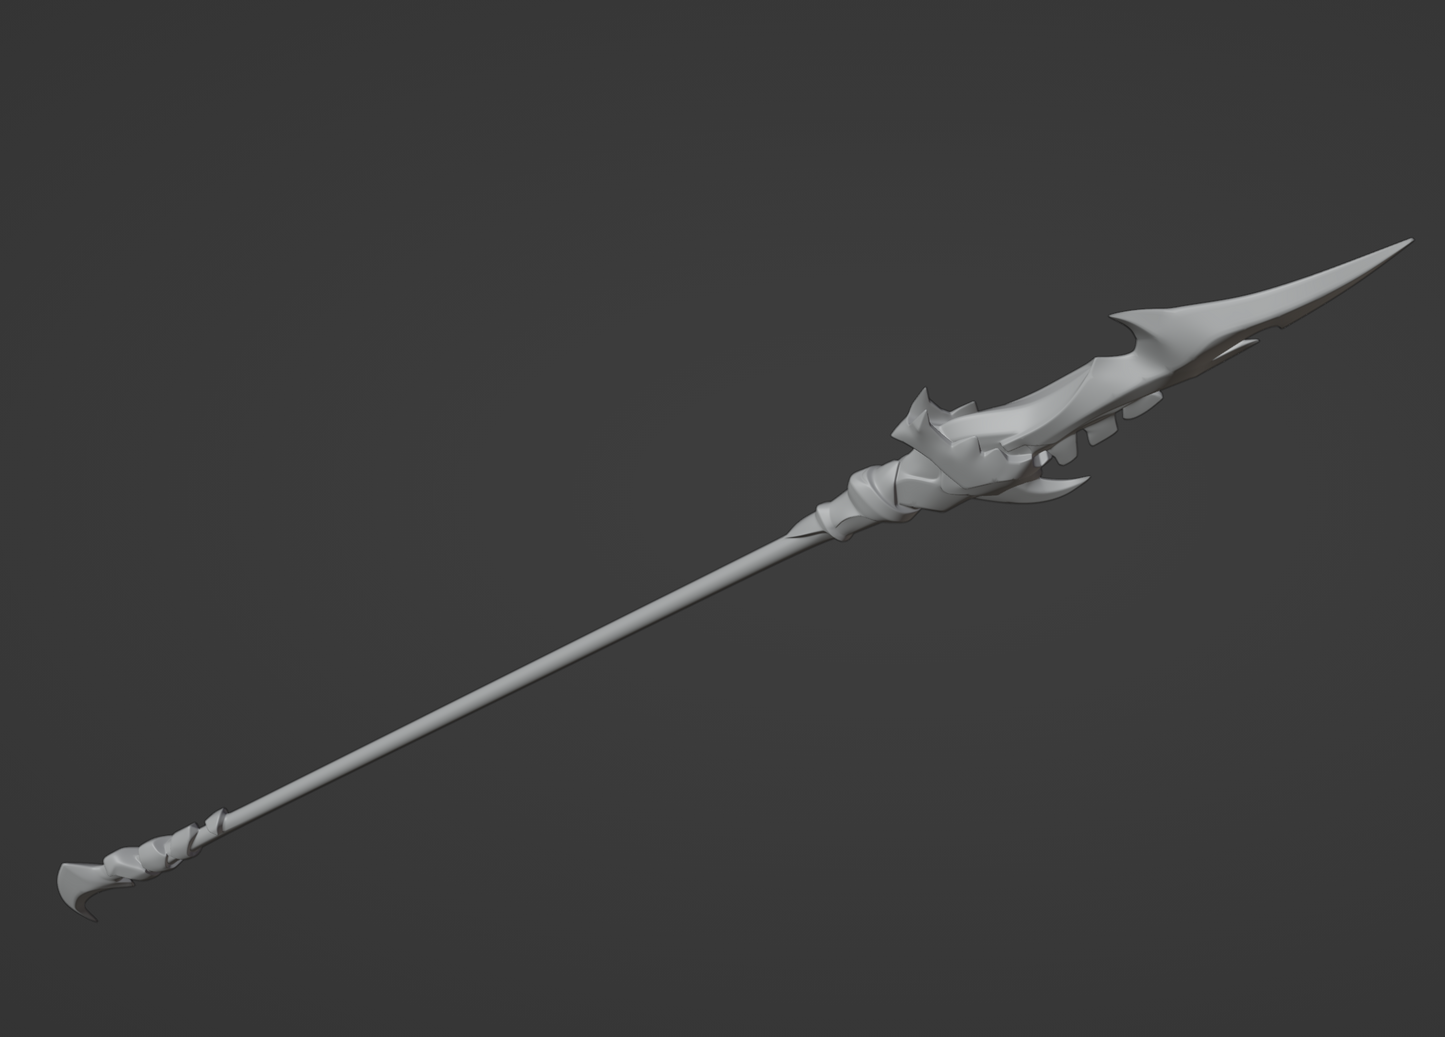 Dragonspine Spear - Digital 3D Model Files and Physical 3D Printed Kit Options - Xiangling Cosplay